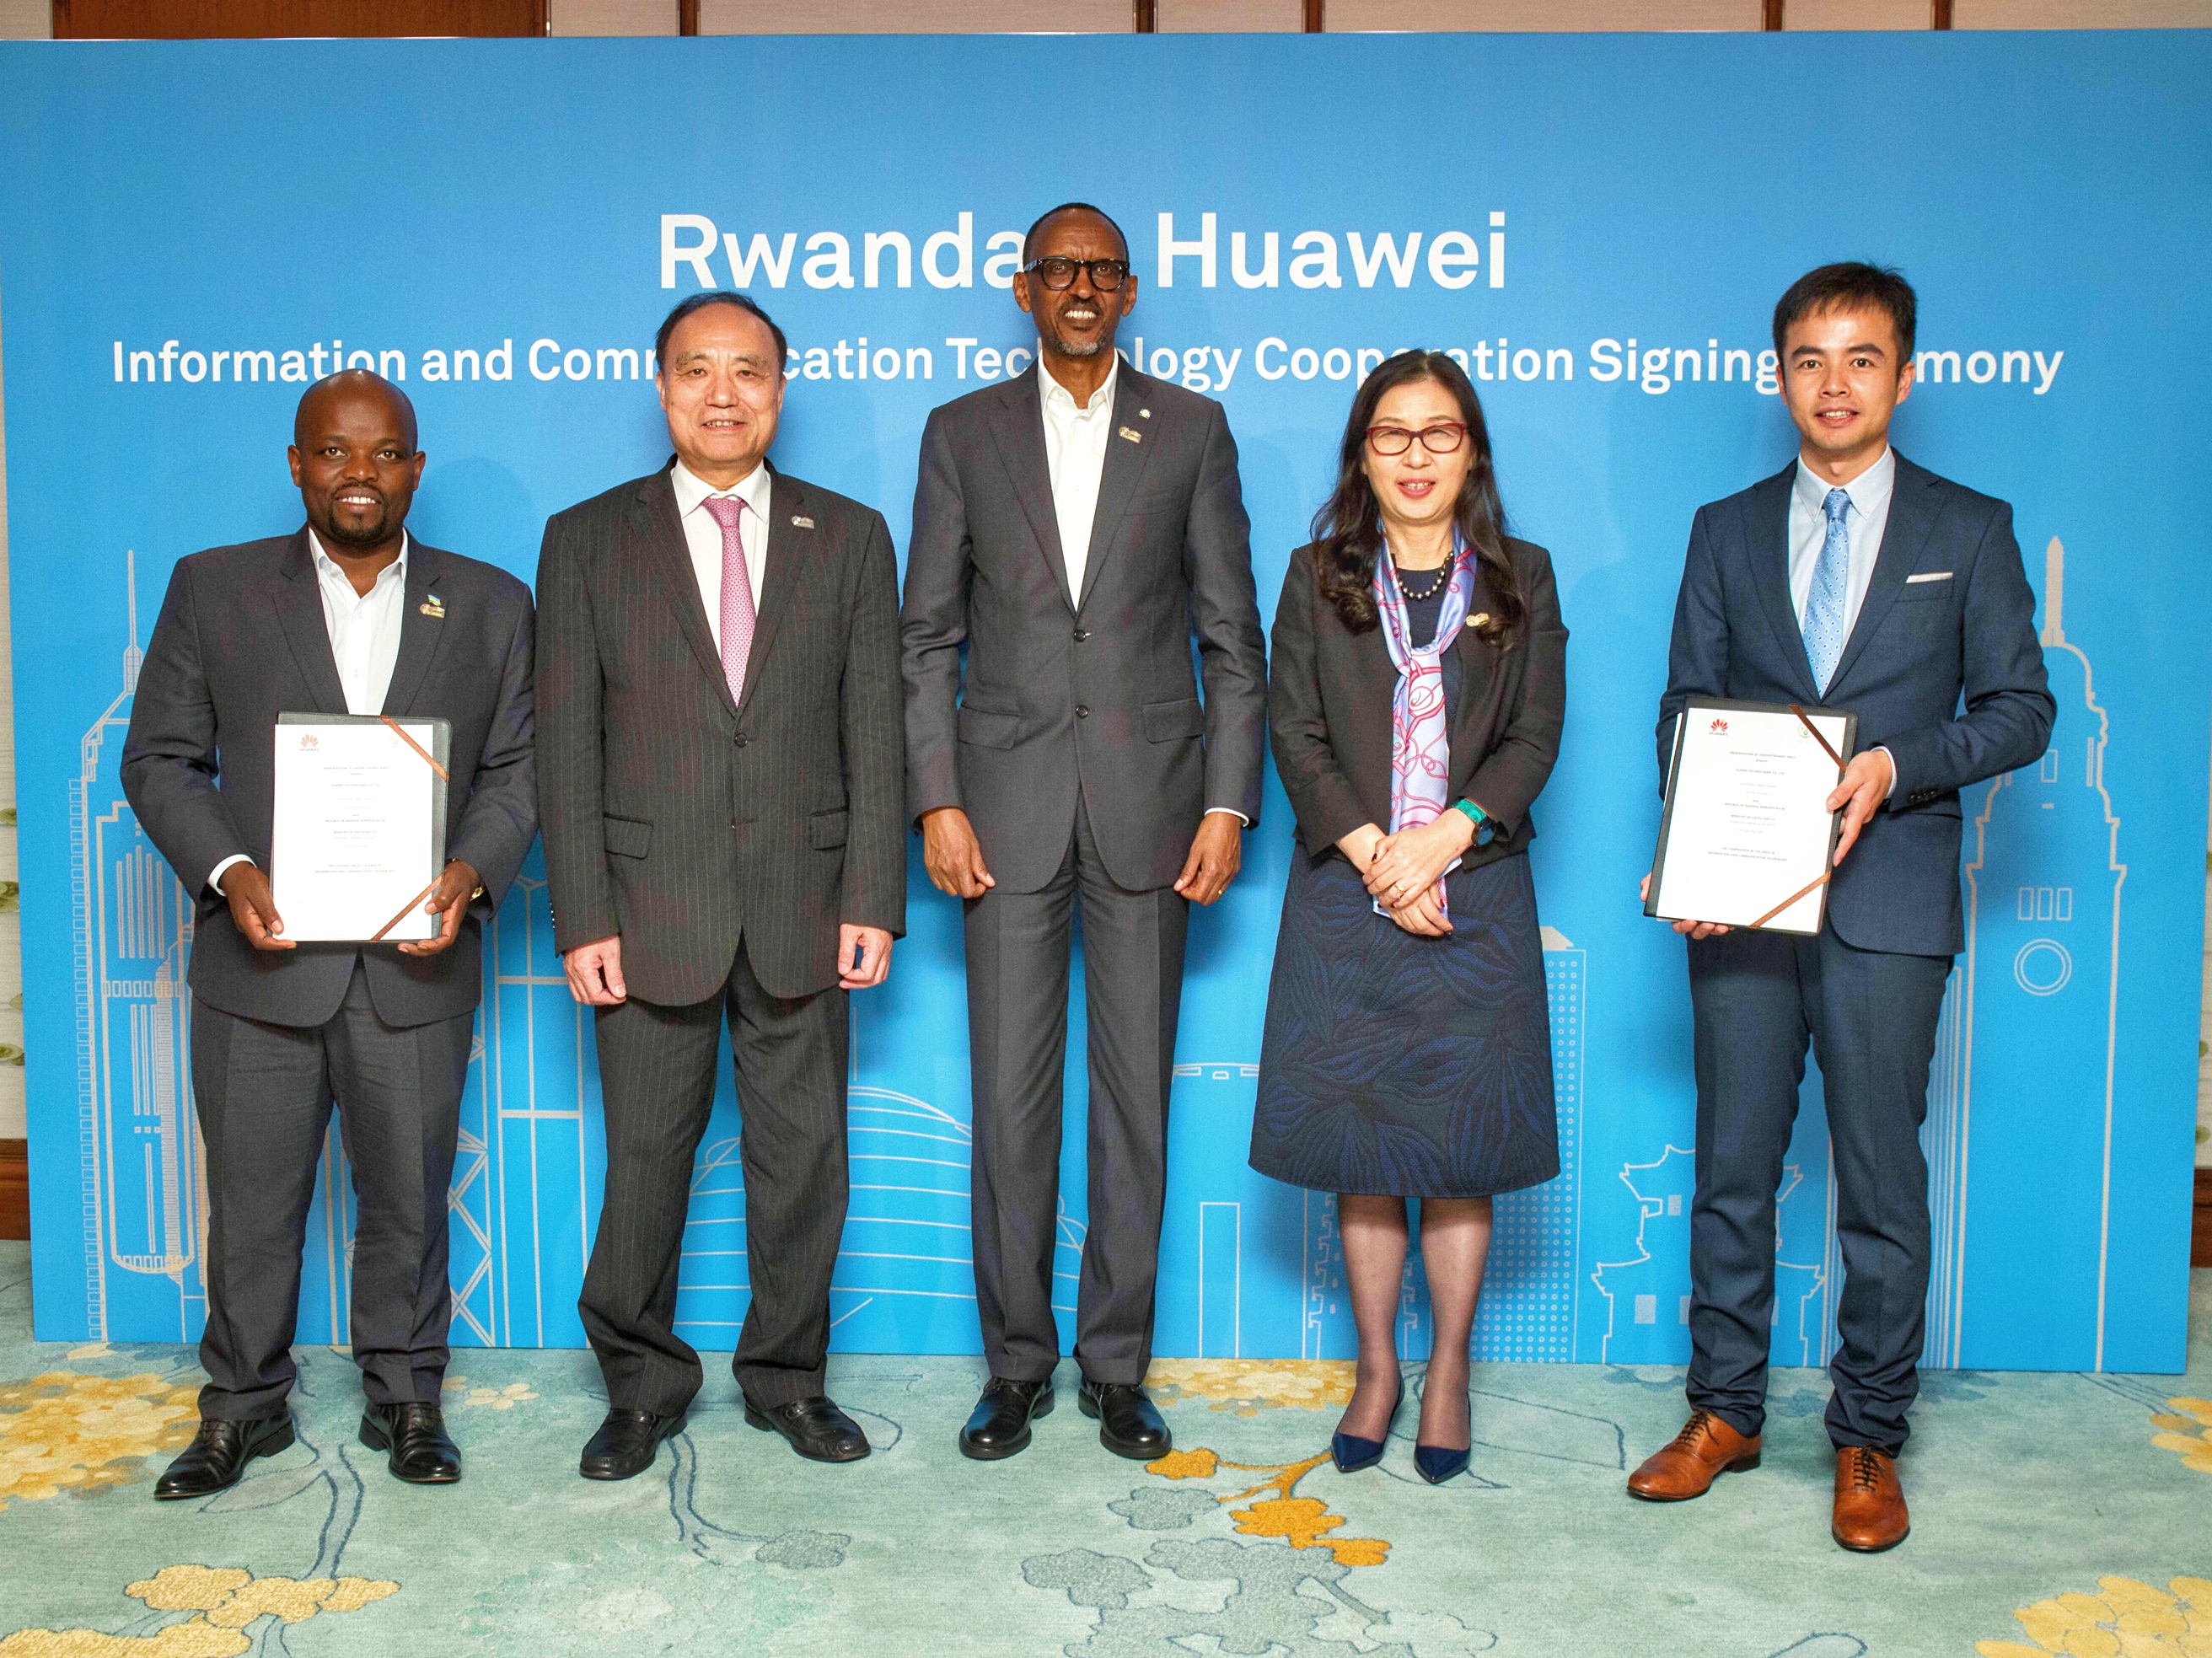 Rwanda President H.E. Paul Kagame (Center) and Huawei Chairwoman Ms. Sun Yafang Witnessed the Signing of MOU between Rwanda Government and Huawei with the Rwanda Minister of Youth and ICT Hon. Jean Philbert Nsengimana (Far Left), ITU Secretary General Mr. Zhao Houlin (2nd Left), and Huawei Rwanda Managing Director Mr. Stanley Chyn (Extreme Right). Photo Courtesy: Huawei